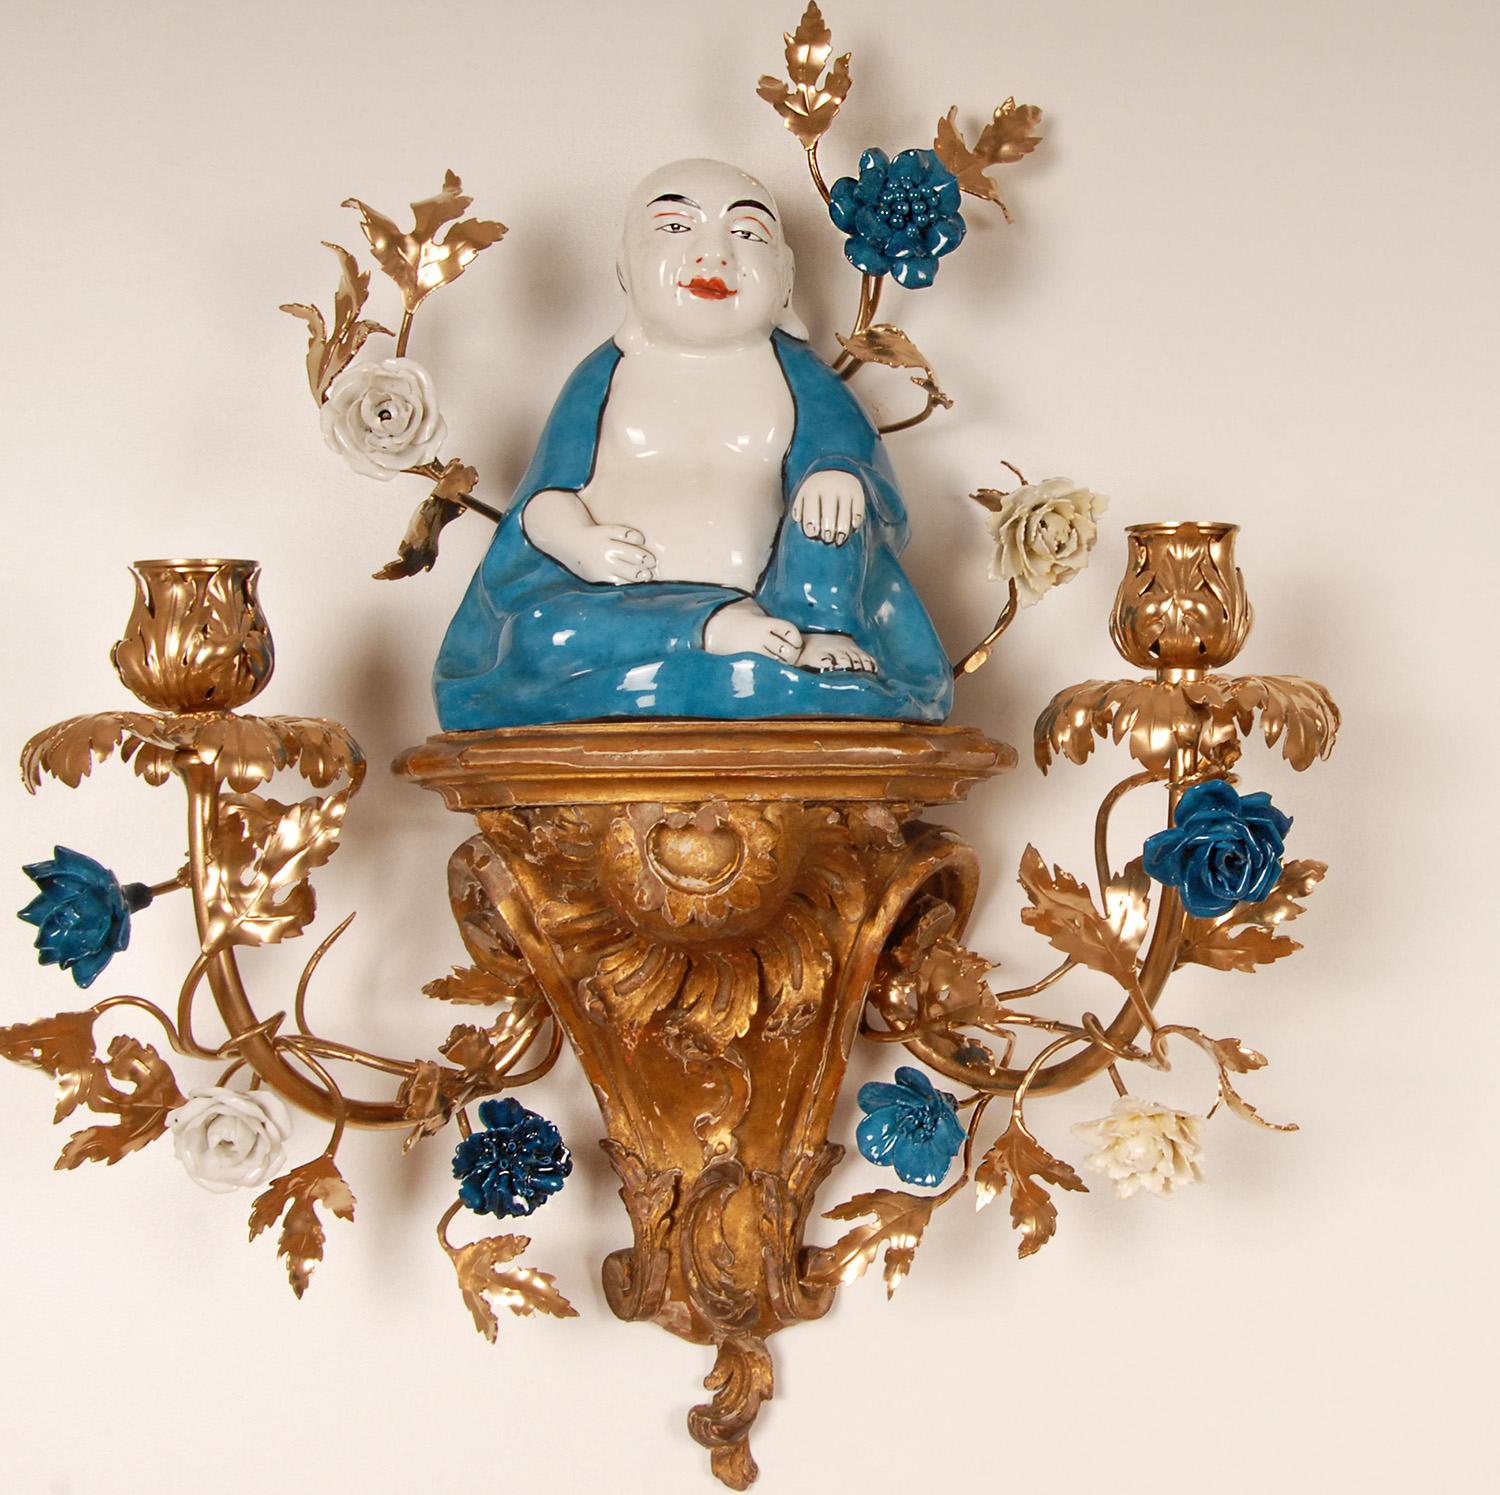 A pair French Victorian blue and white wall candelabra giltwood console Rococo with porcelain buddha figure and flowers
Design: In the manner of Meissen, Sevres porcelain, Dresden, Maison Bagues, Royal Delft.
Style: Rococo, Baroque, Chinoiserie,